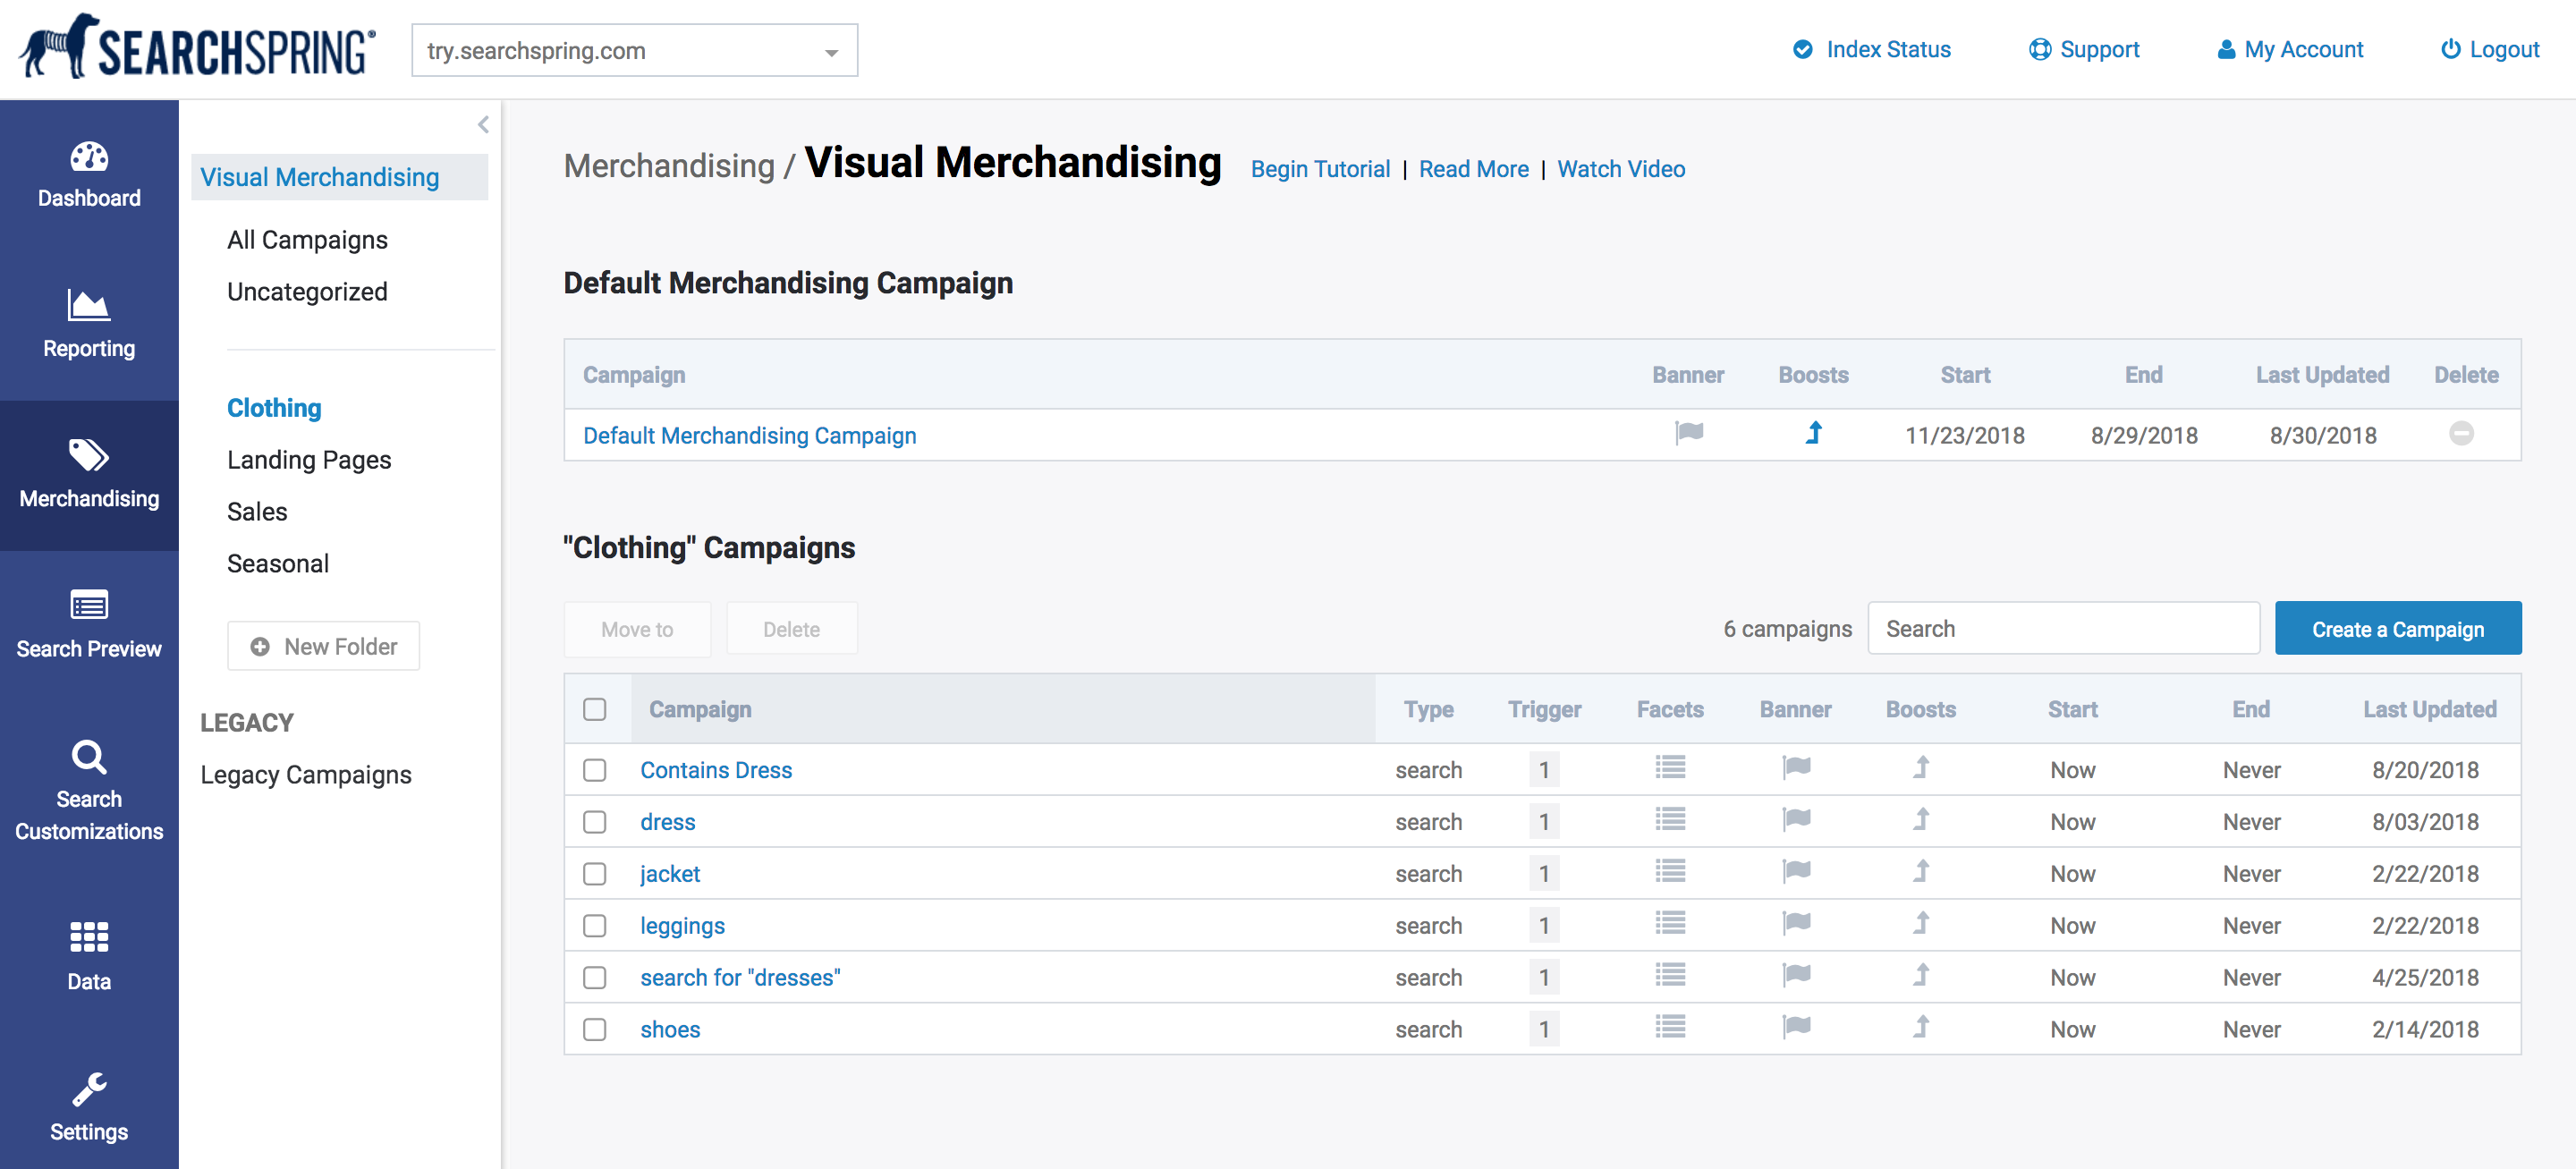 redesign searchspring managment console visual merchandise list